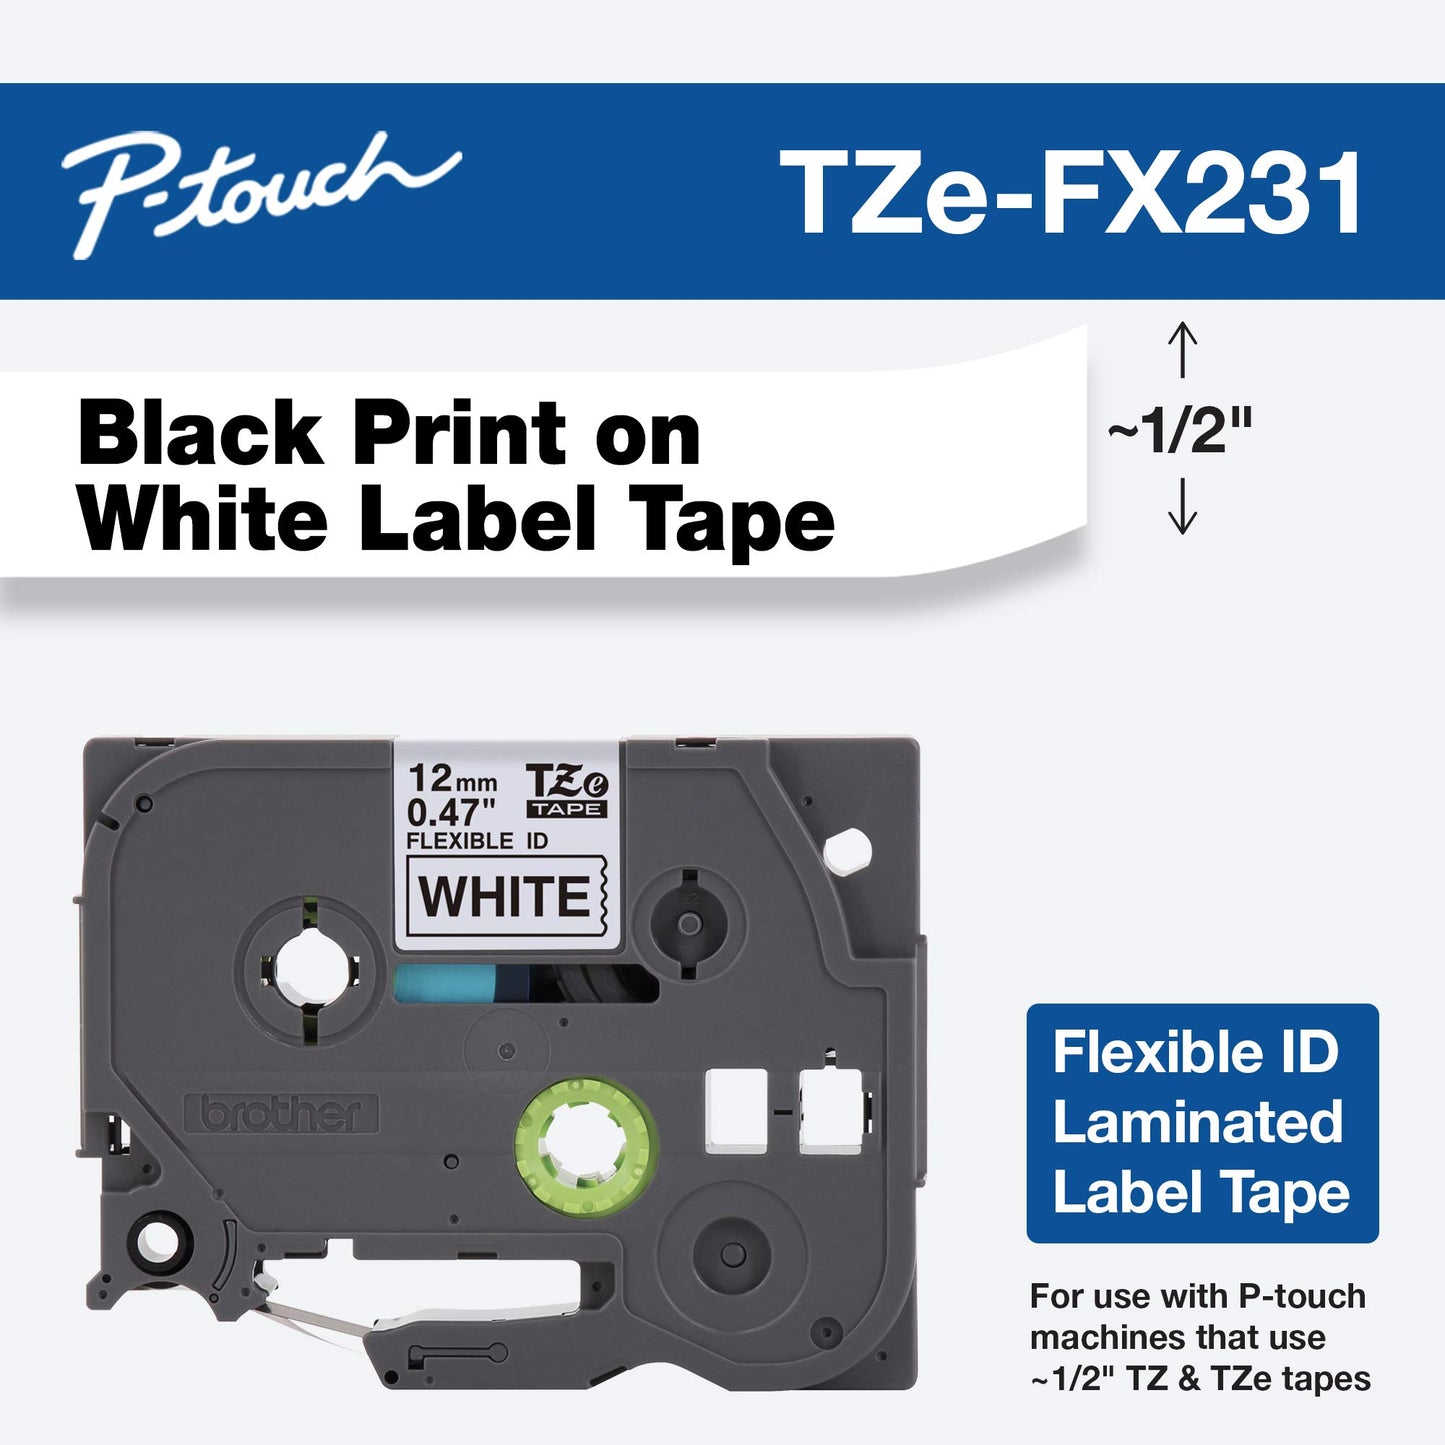 Brother Genuine P-touch TZE-MQG35 Tape, 1/2" (0.47") Wide Standard Laminated Tape, Black on Clear, Laminated for Indoor or Outdoor Use, Water-Resistant, 0.47" x 26.2' (12mm x 5M), TZeAF131